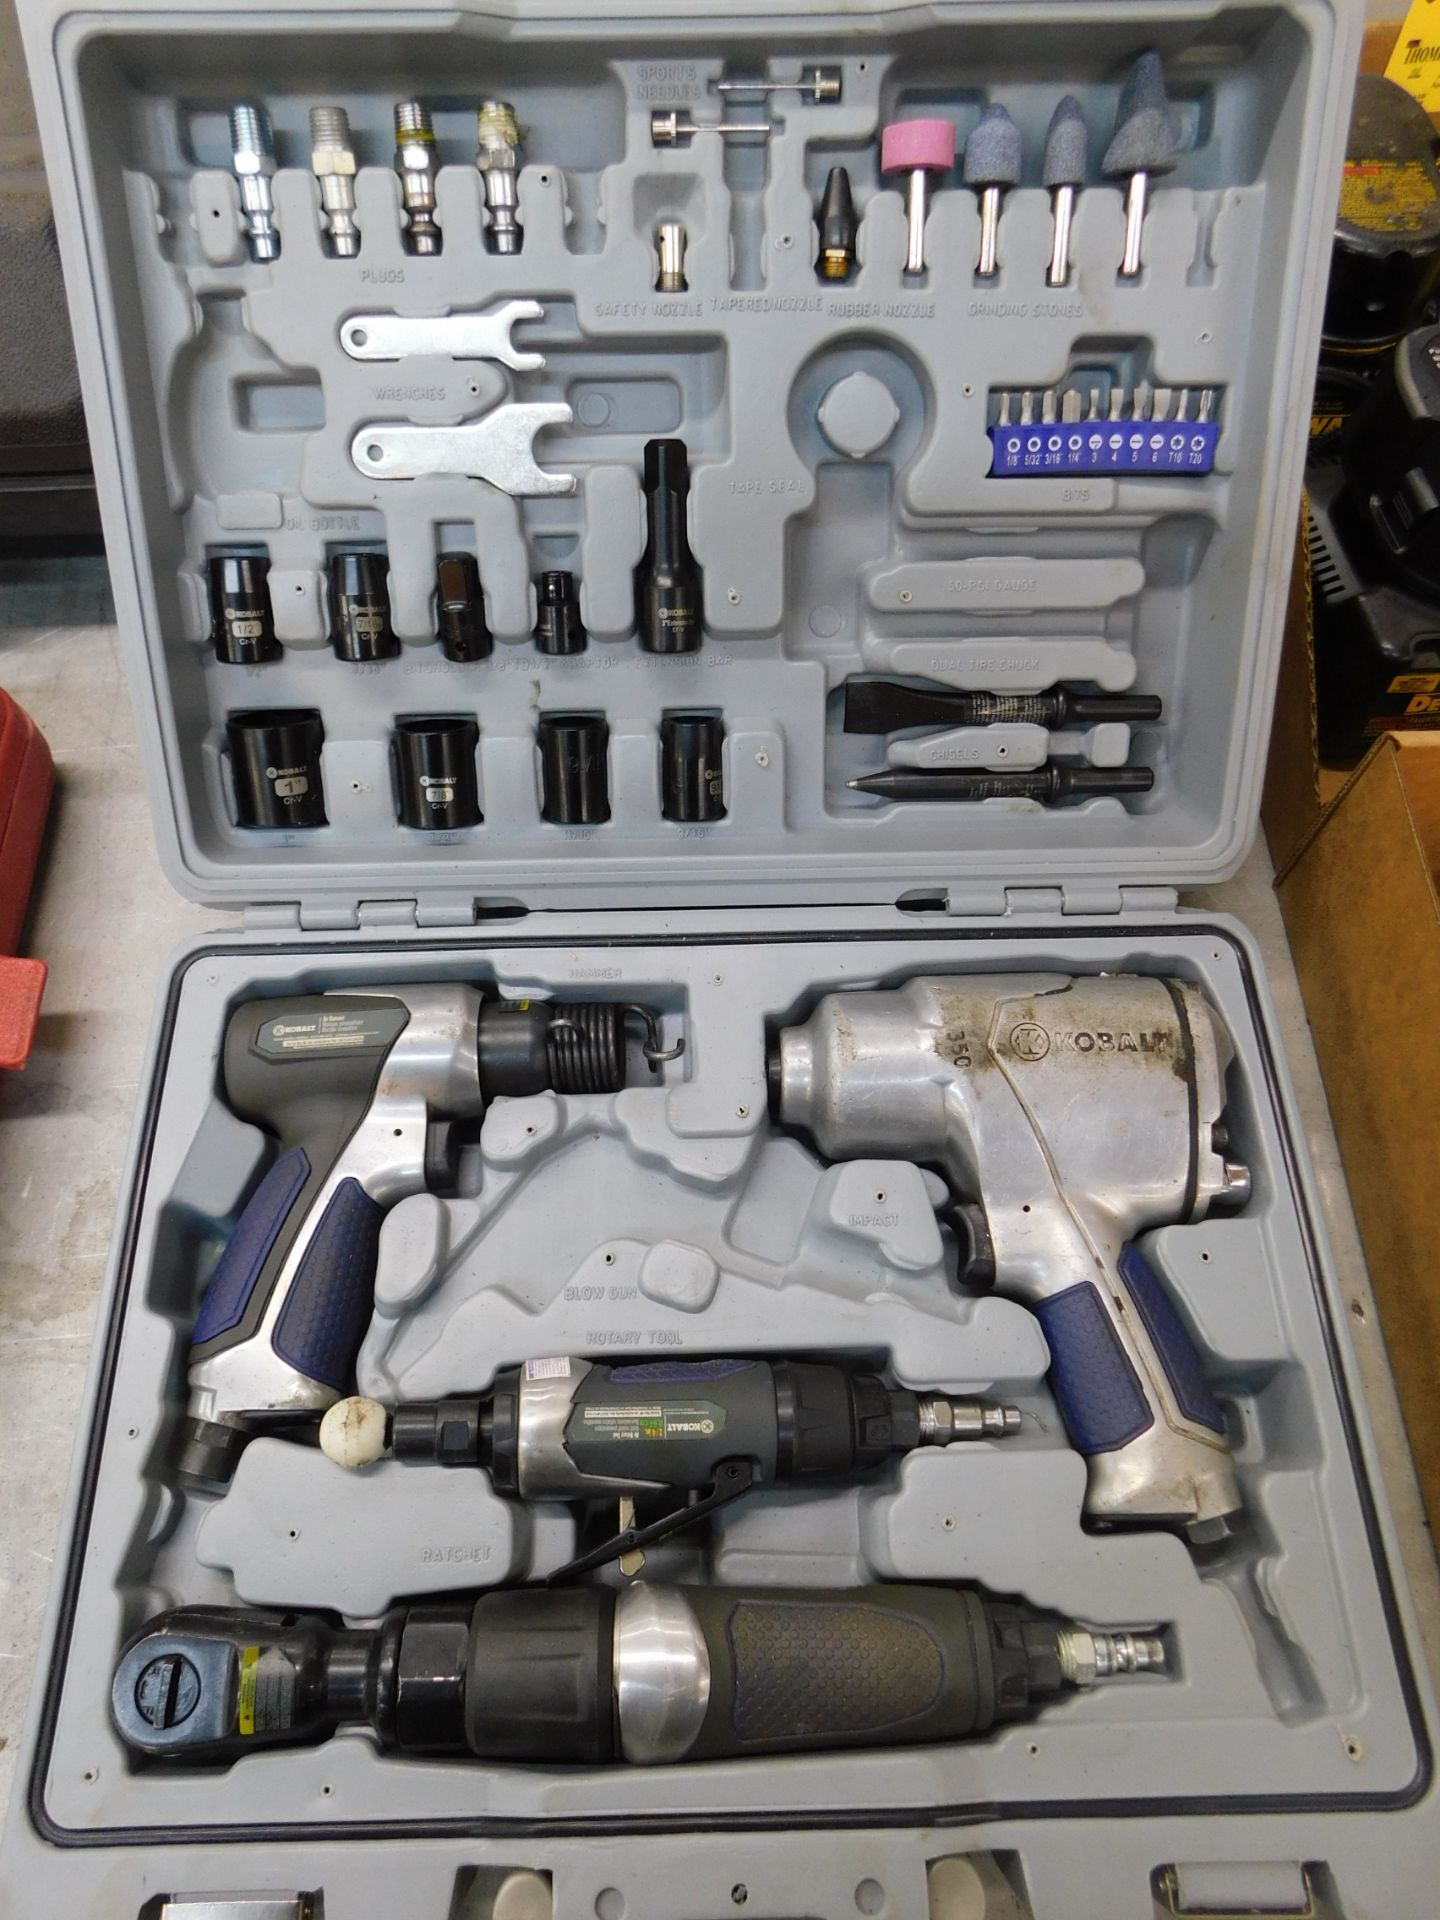 Kobalt Pneumatic Tool Set with Impact, Hammer, Die Grinder and Ratchet